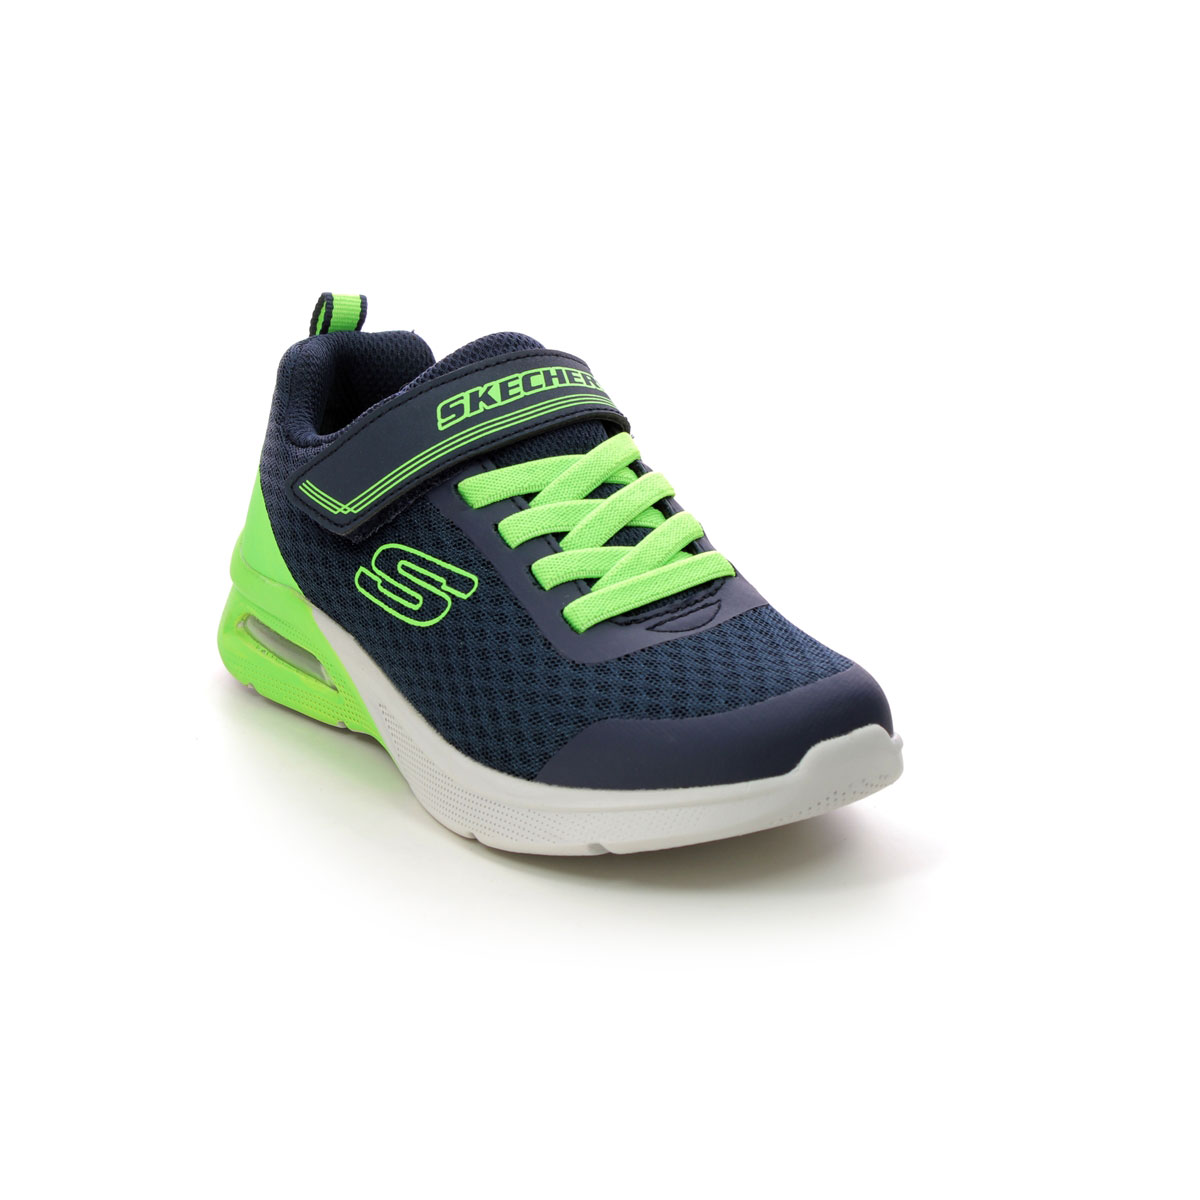 Skechers Microspec Max Navy Lime Kids Trainers 403773L In Size 29 In Plain Navy Lime For kids